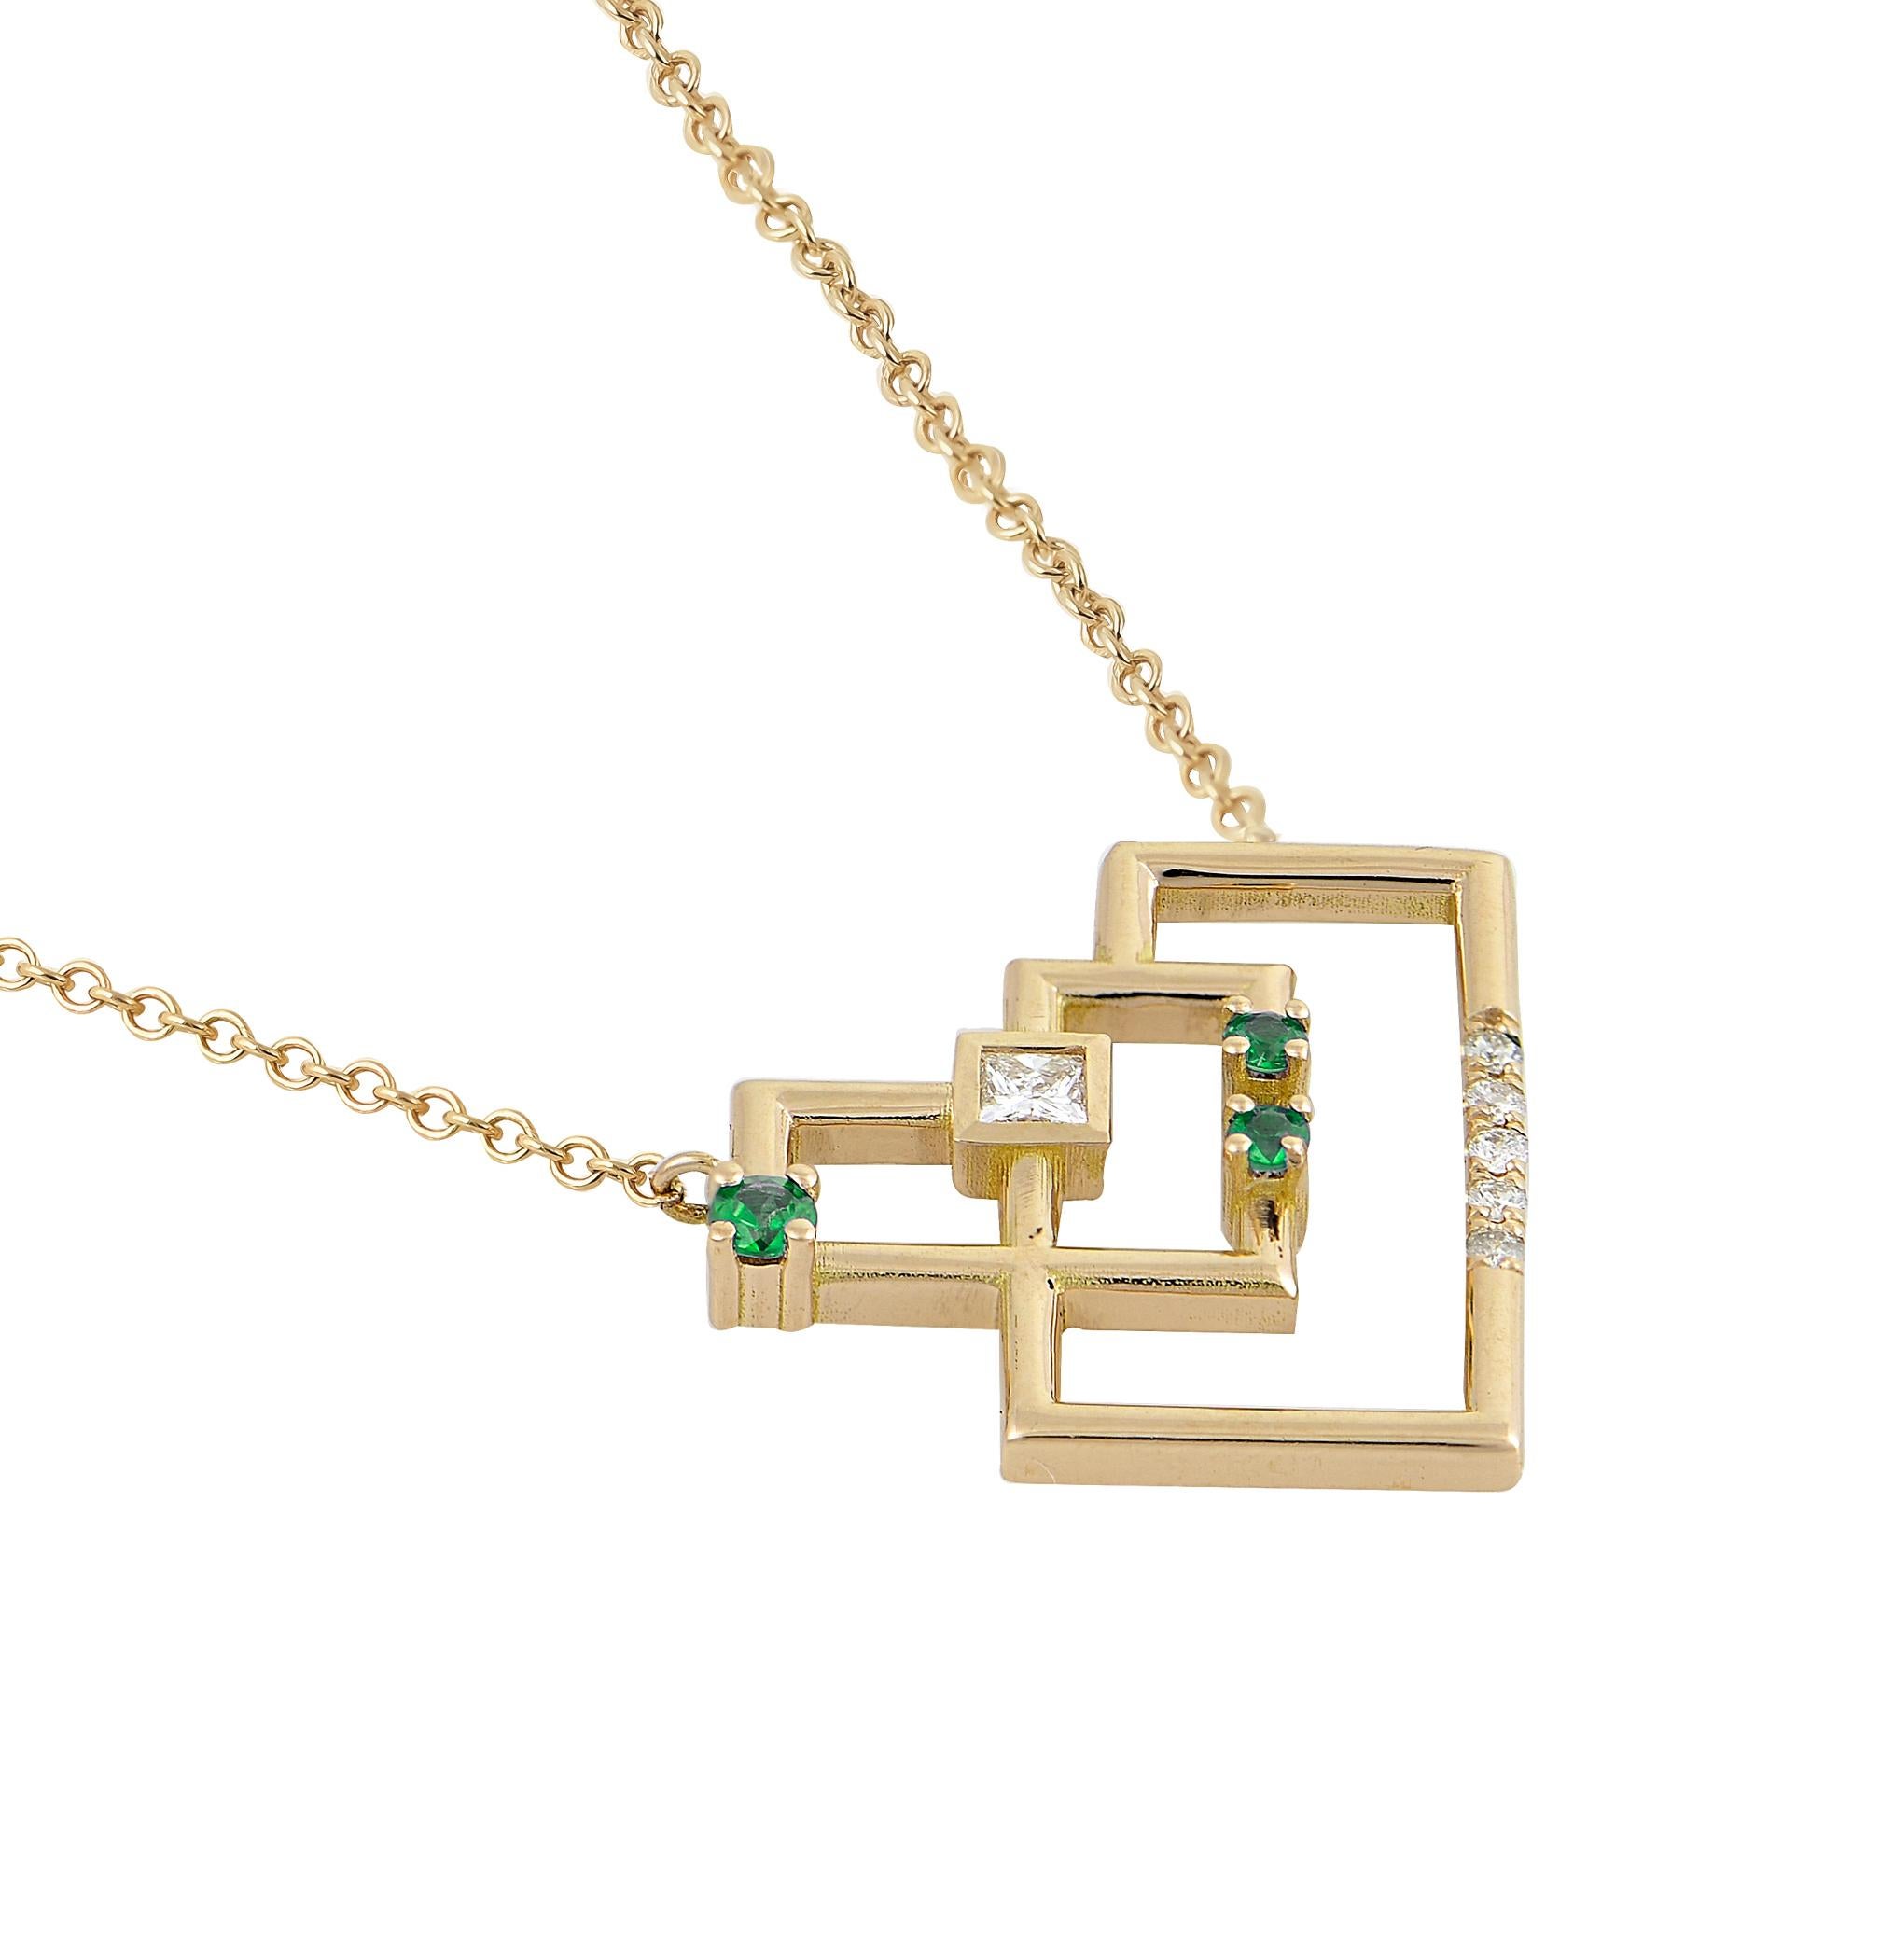 Designer: Alexia Gryllaki

Dimensions: motif 17x19mm, chain 450mm
Weight: approximately 3.5g 
Barcode: ING027PE

The Interlocking Geometry pendant in 18 karat yellow gold with emeralds approx. 0.07cts, a princess-cut diamonds and round brilliant-cut